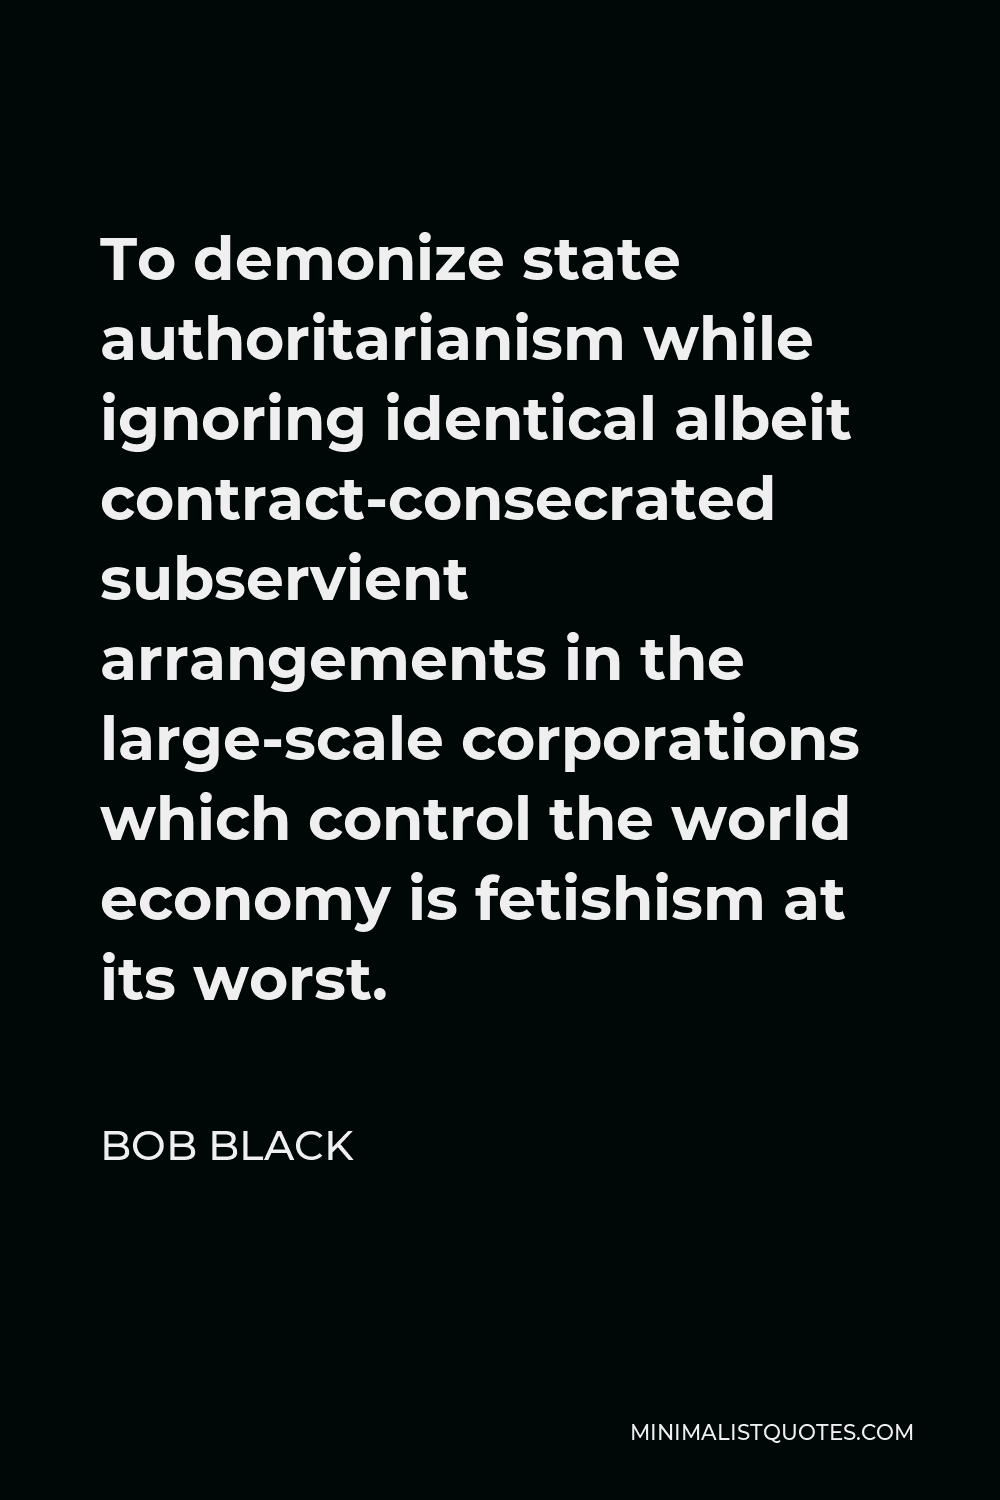 Bob Black Quote - To demonize state authoritarianism while ignoring identical albeit contract-consecrated subservient arrangements in the large-scale corporations which control the world economy is fetishism at its worst.